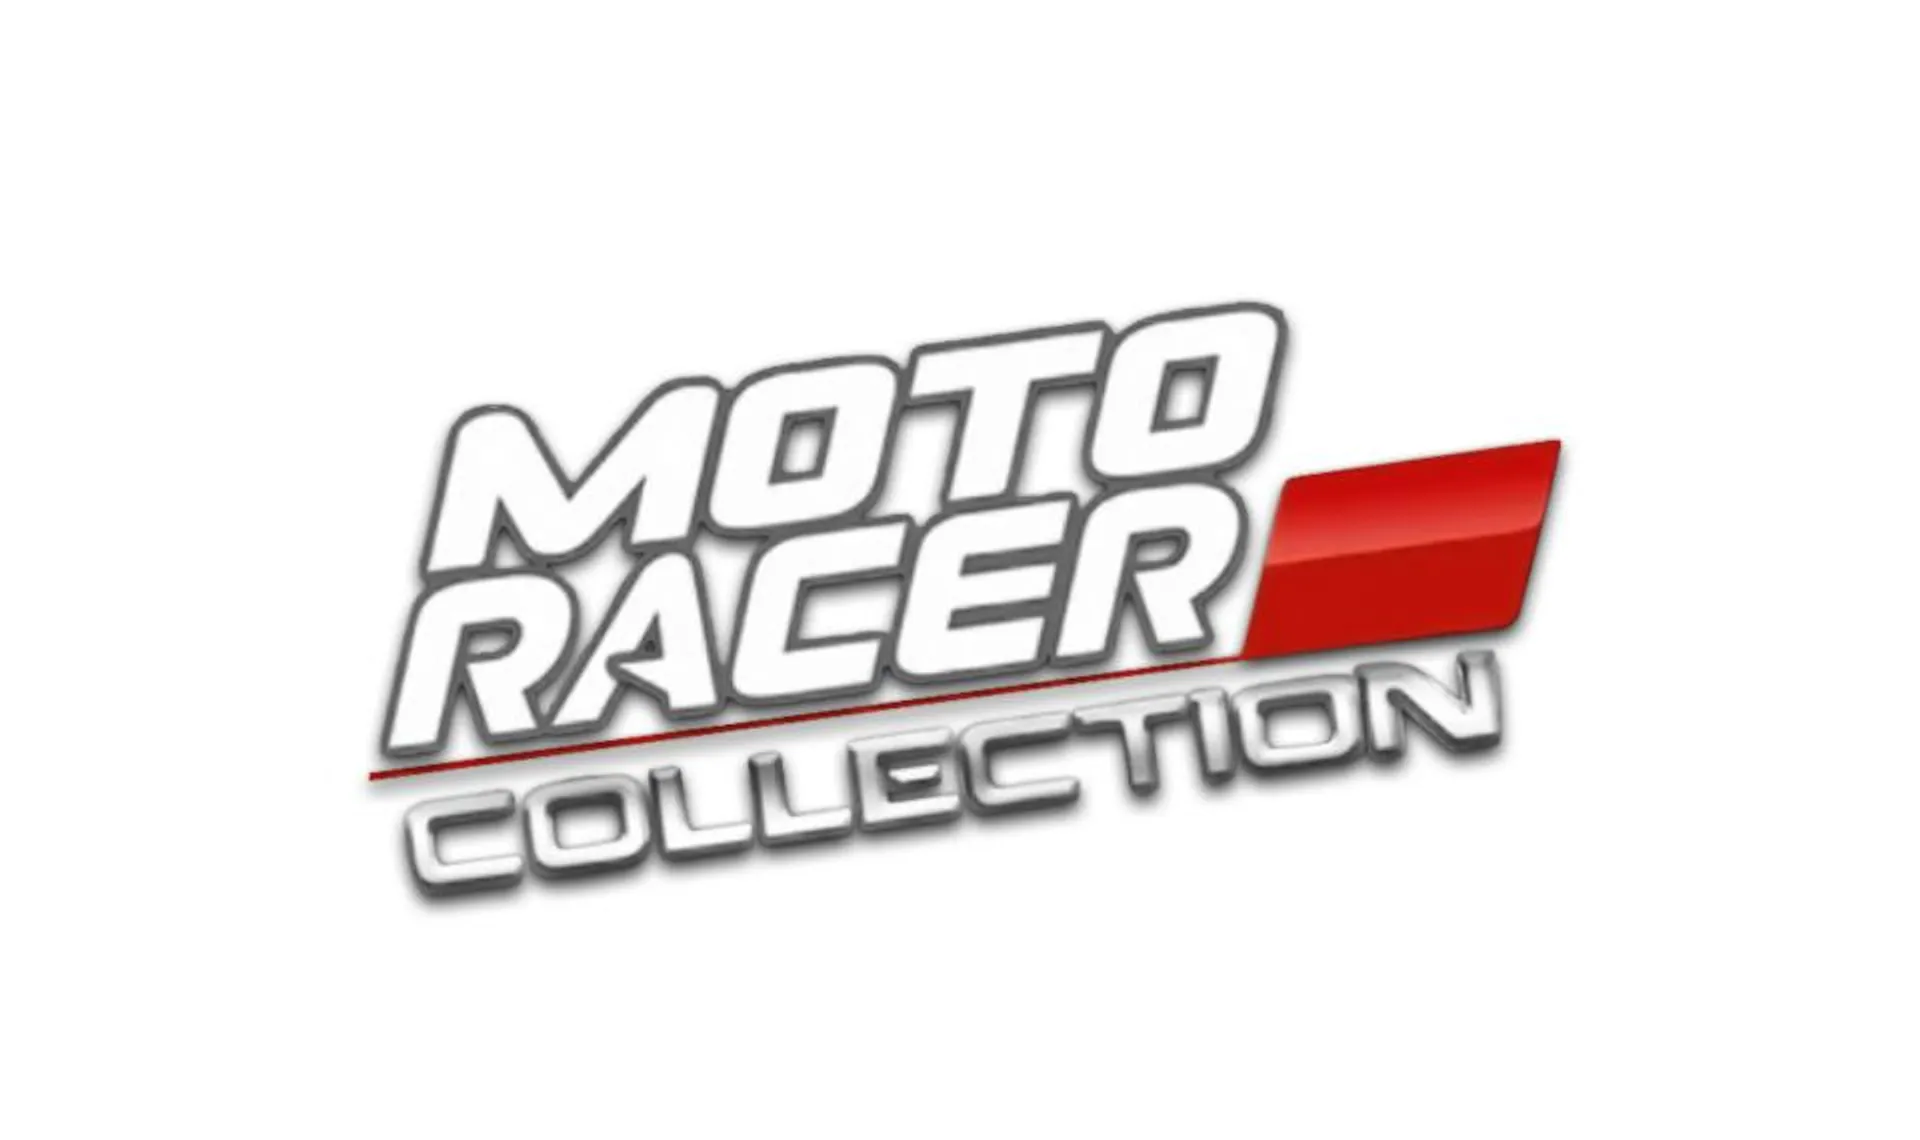 The Moto Racer Collection